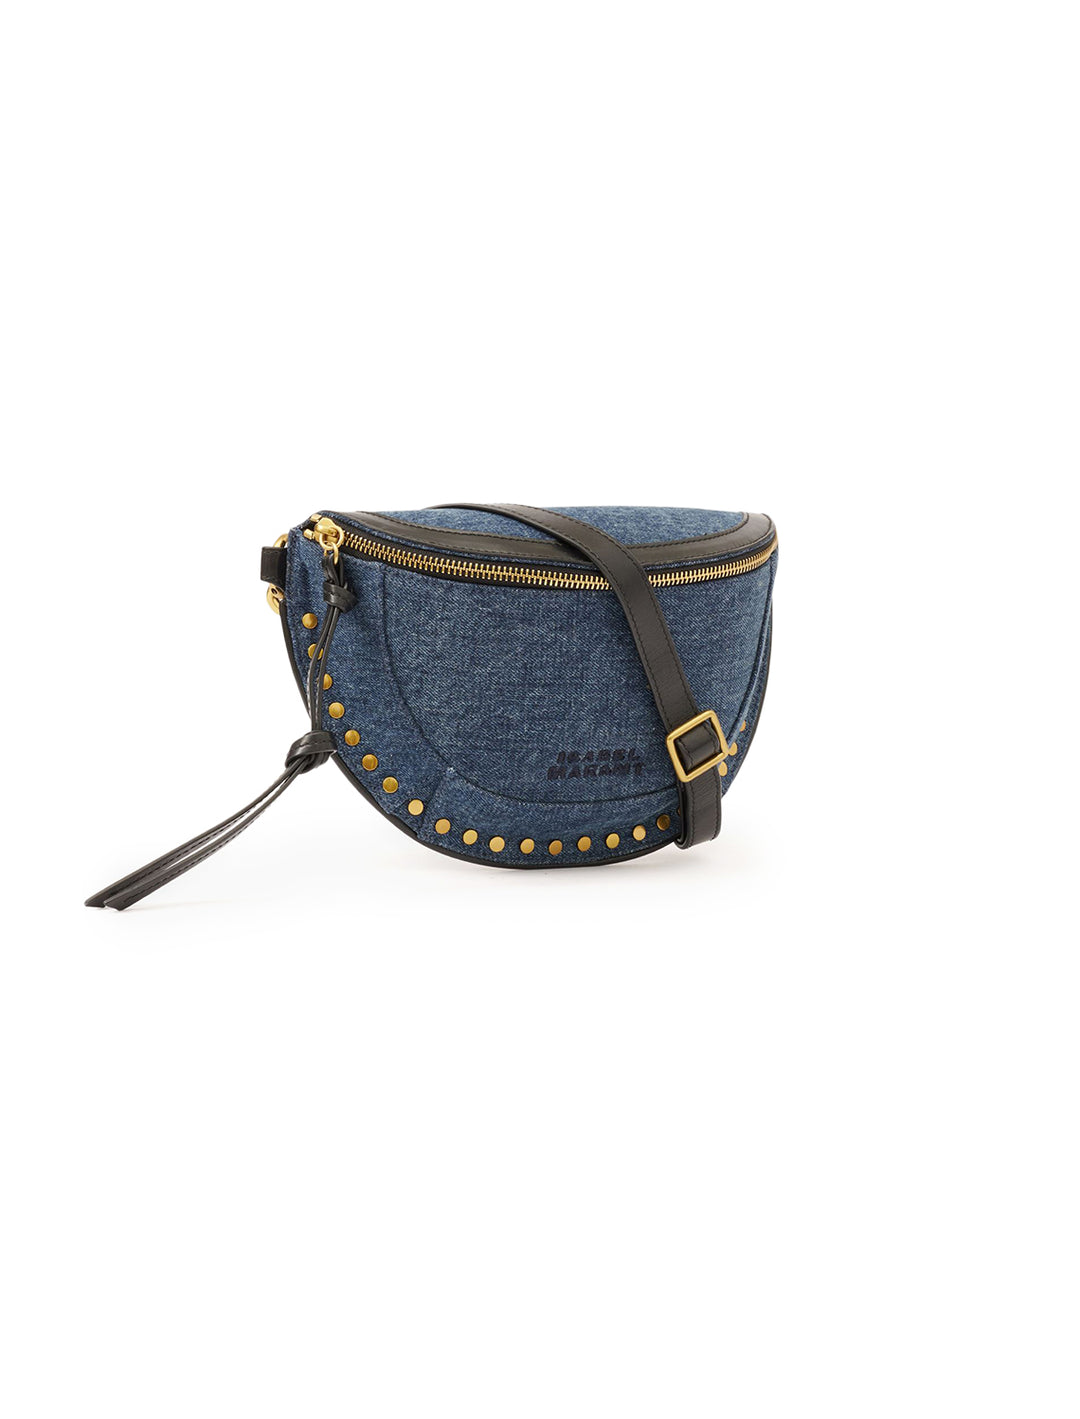 Front angle view of Isabel Marant Etoile's skano in dark blue.